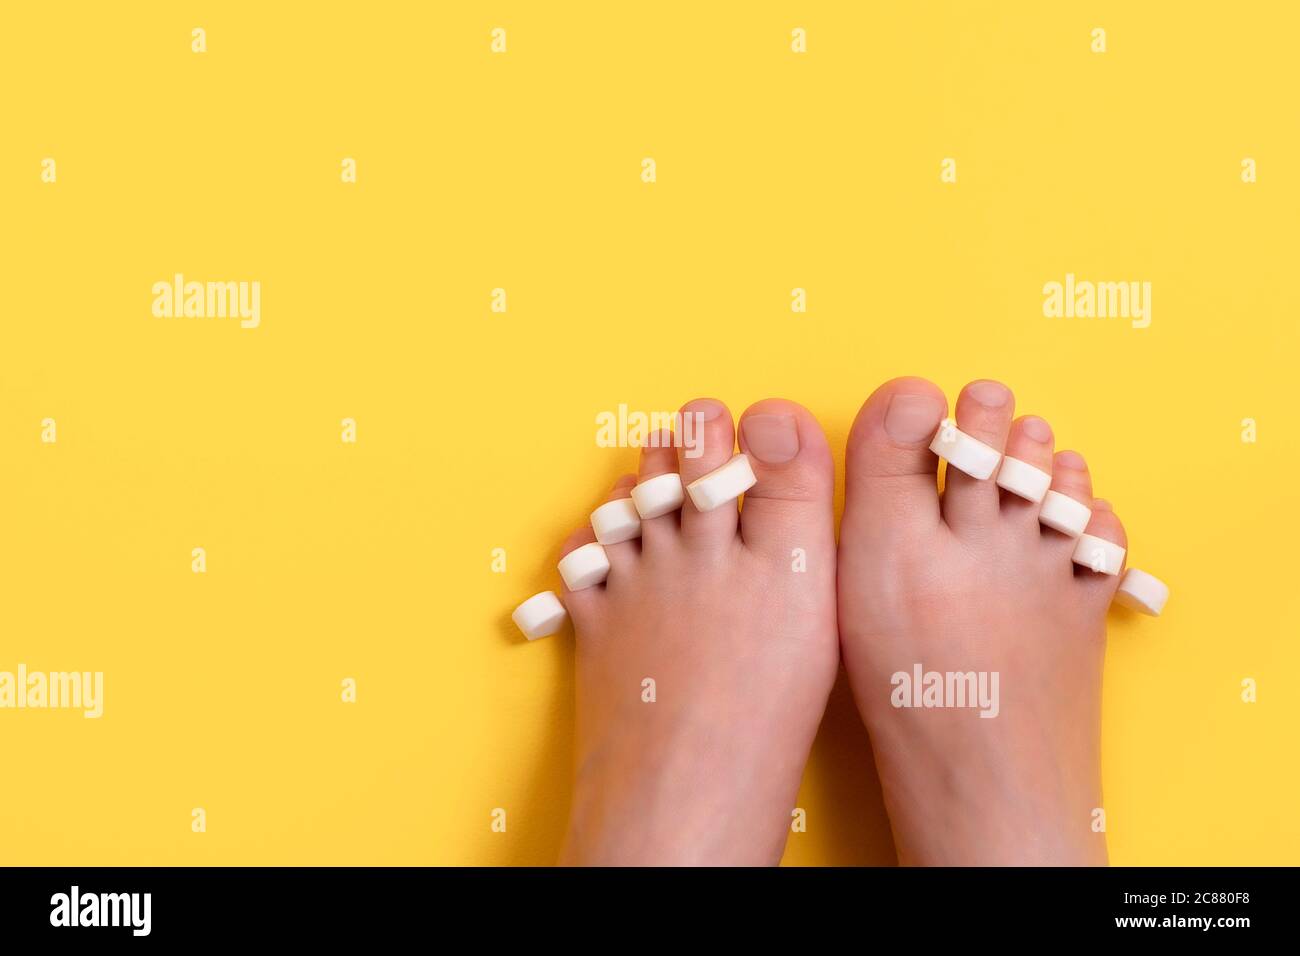 Female feet with sponge for pedicure on fingers on bright yellow background with copy space. Care about nails, pedicure and manicure beauty salon Stock Photo